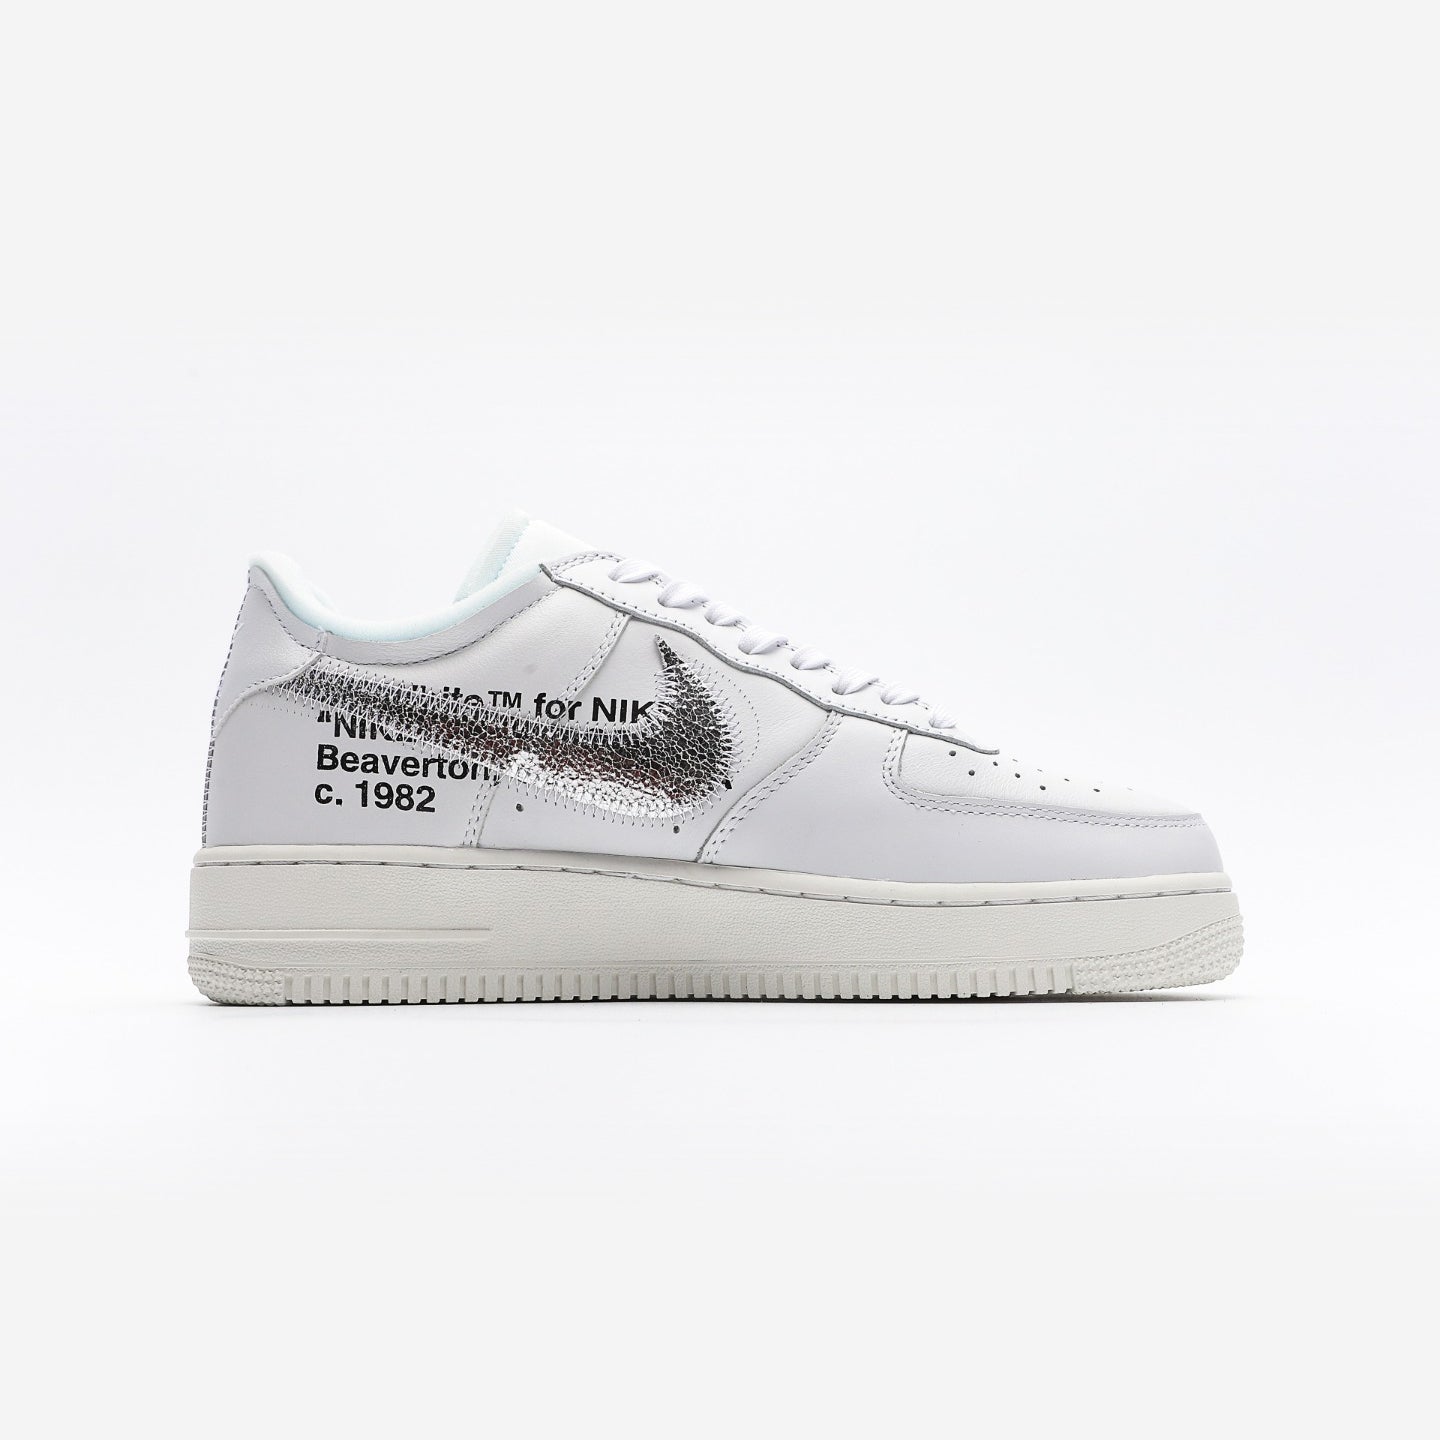 Off-White x Nike Air Force 1 Low ComplexCon - Urbanize Streetwear